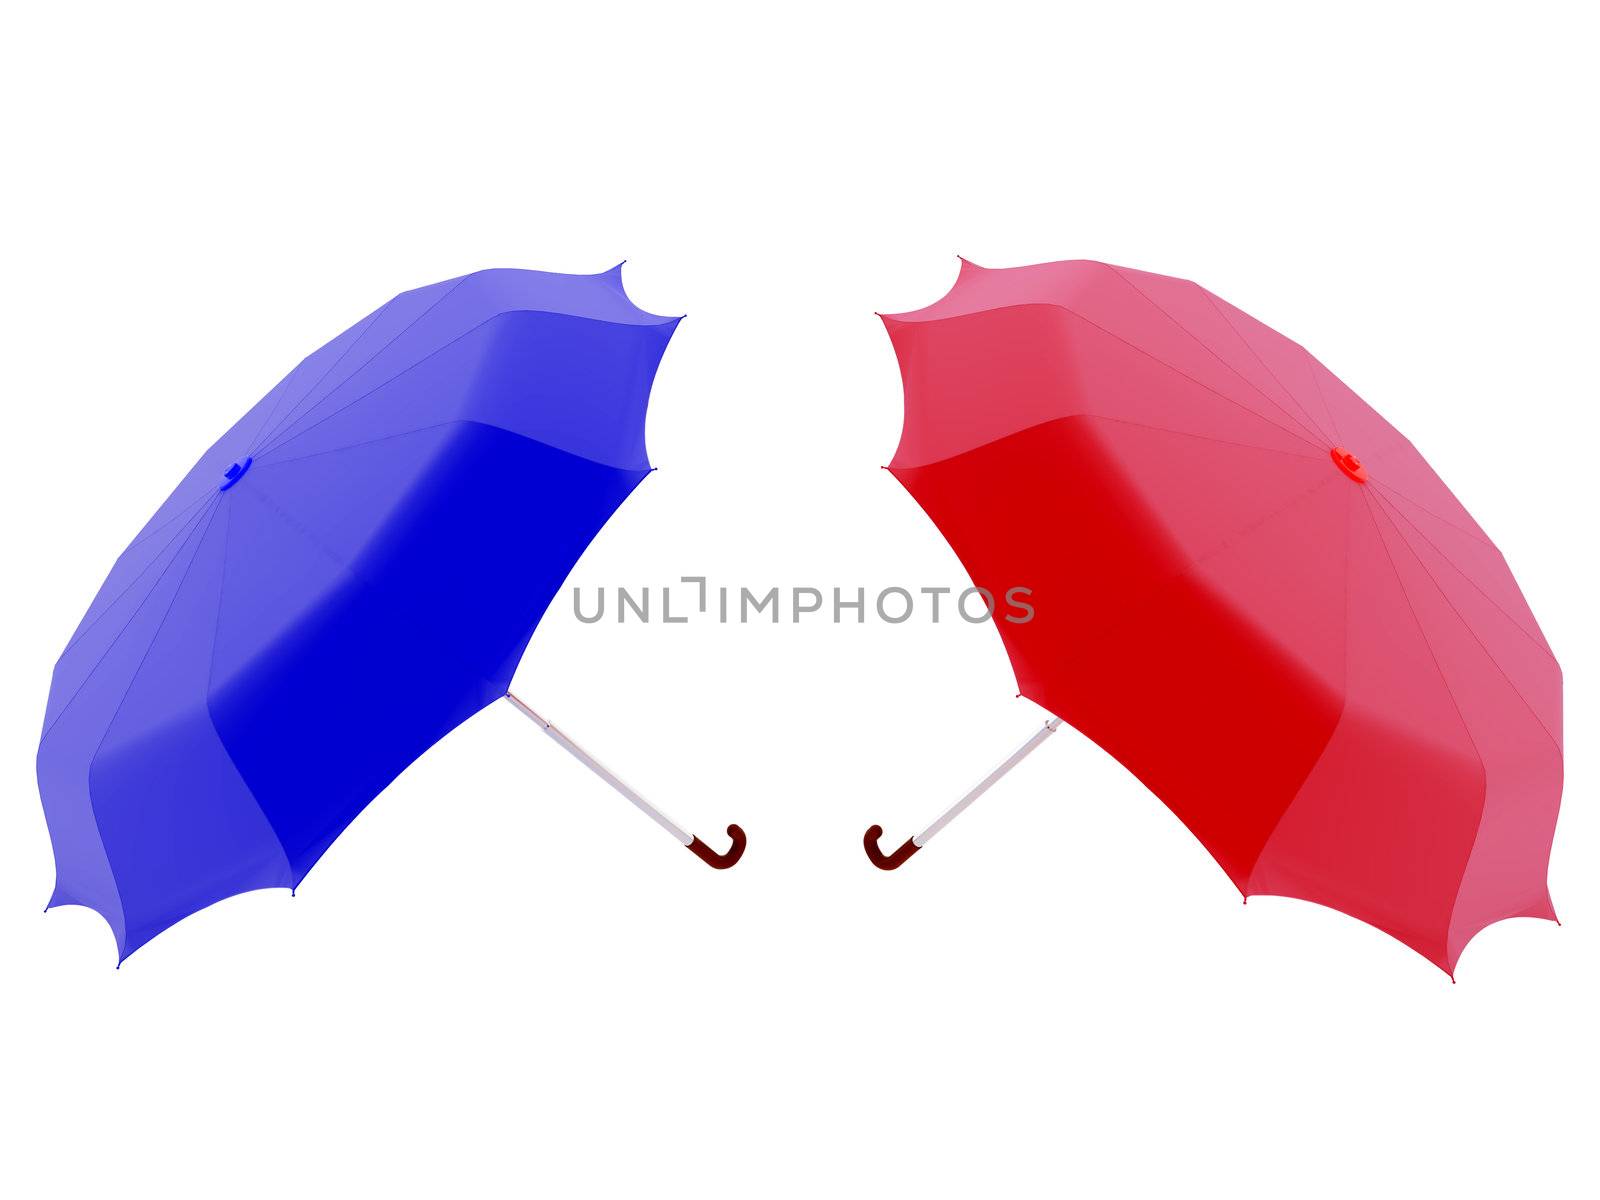 High resolution image red and blue umbrella.  3d illustration over white backgrounds.